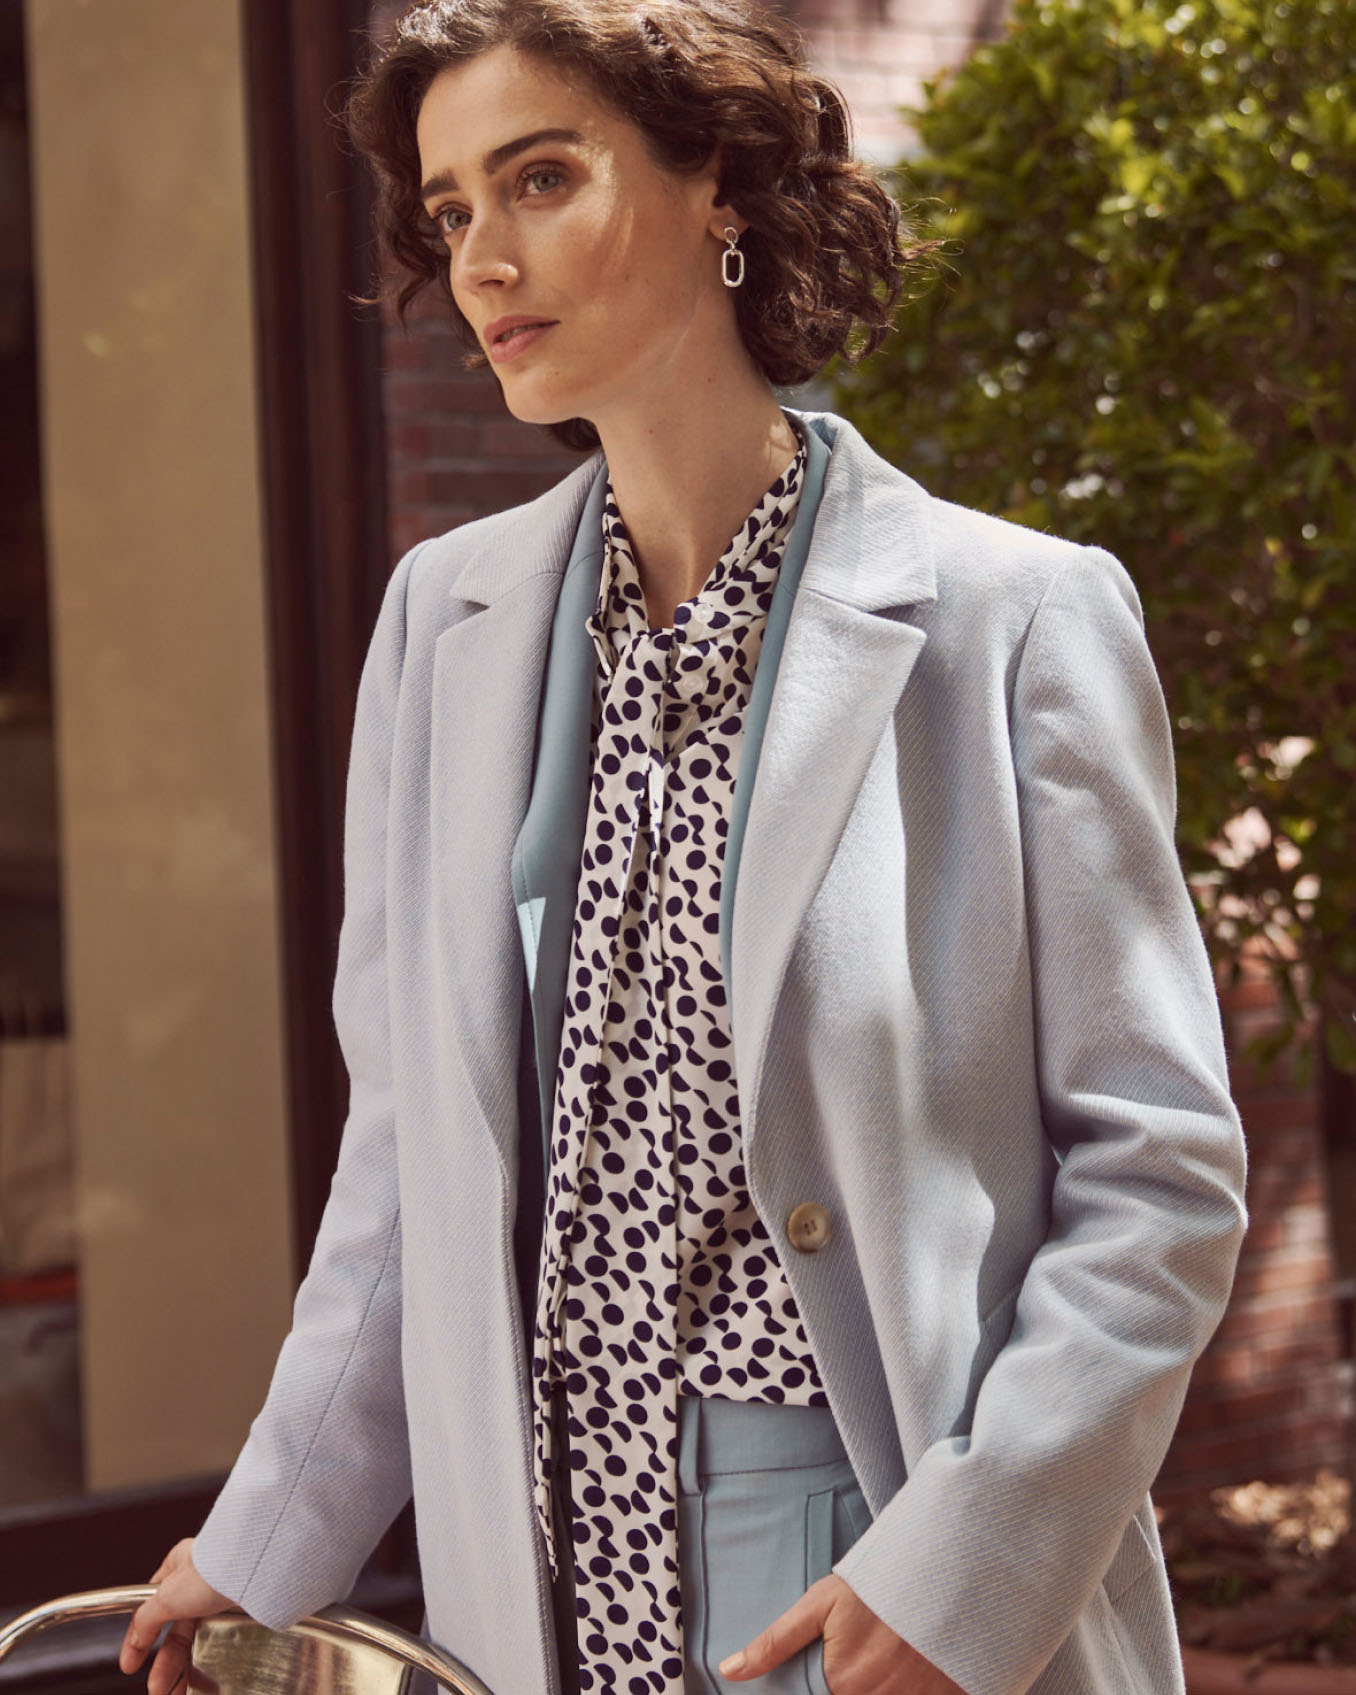 Hobbs model wears a tailored coat over a trouser suit.